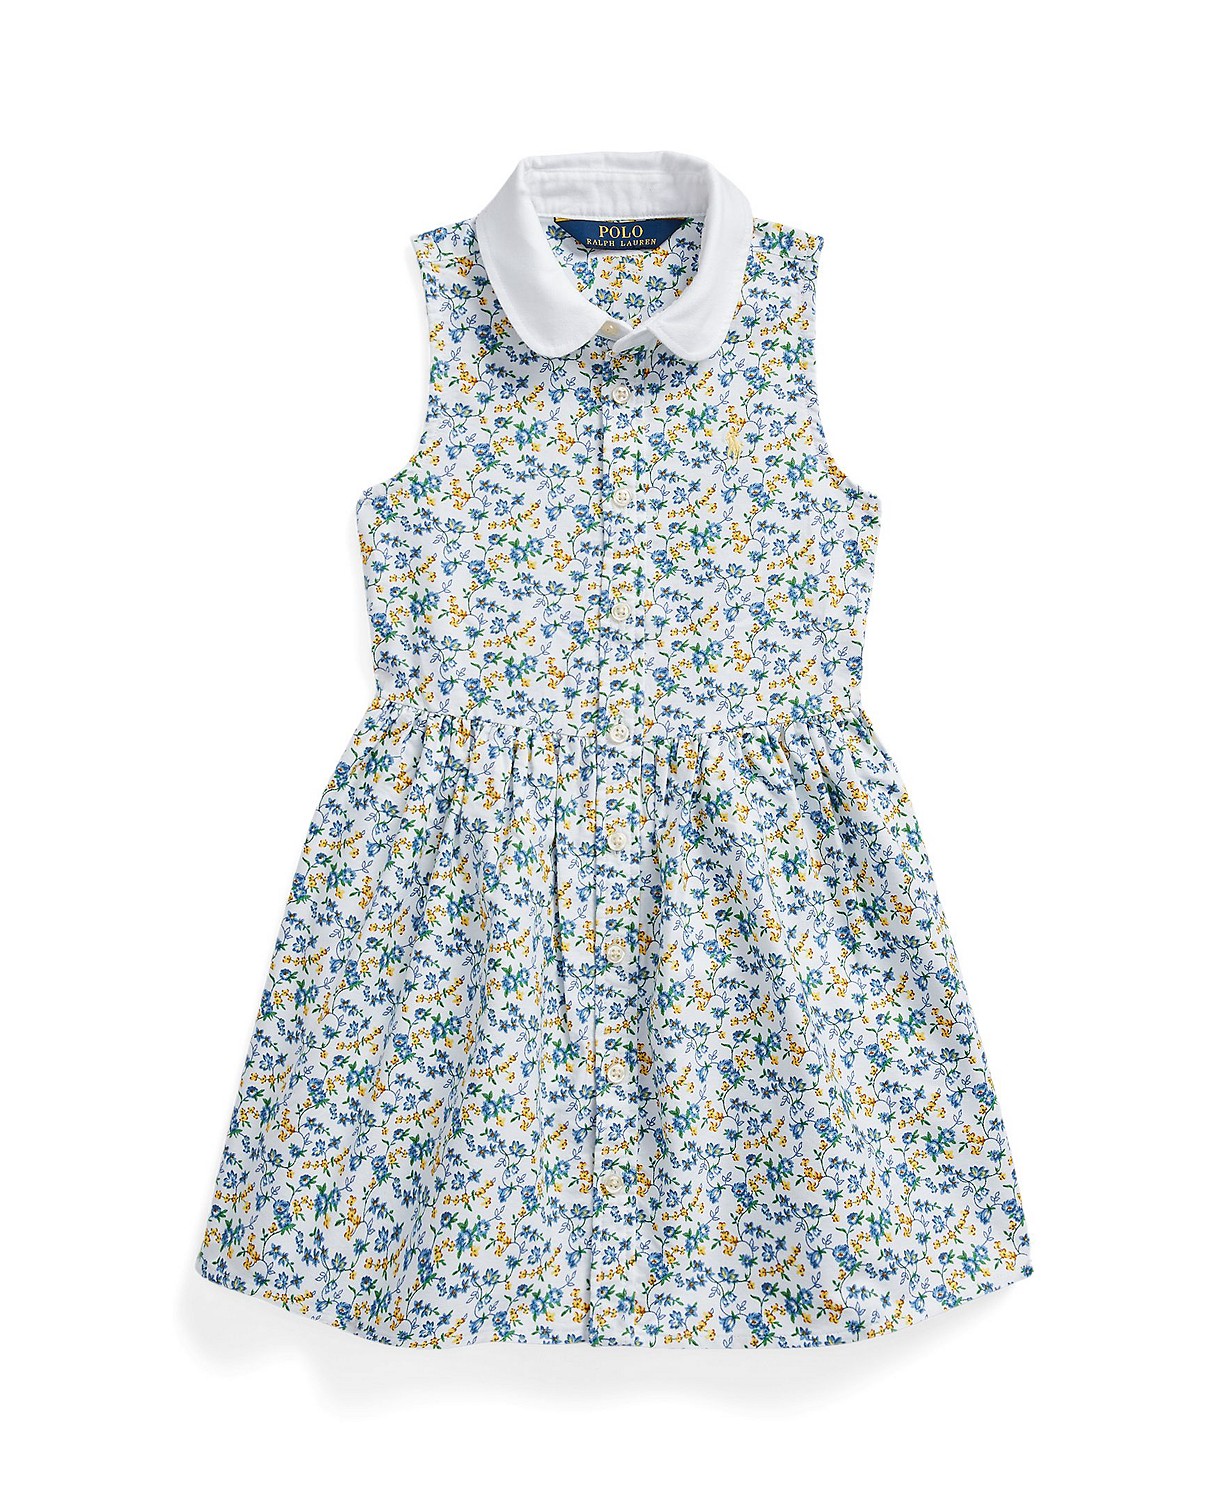 Toddler and Little Girls Floral Cotton Oxford Shirt Dress